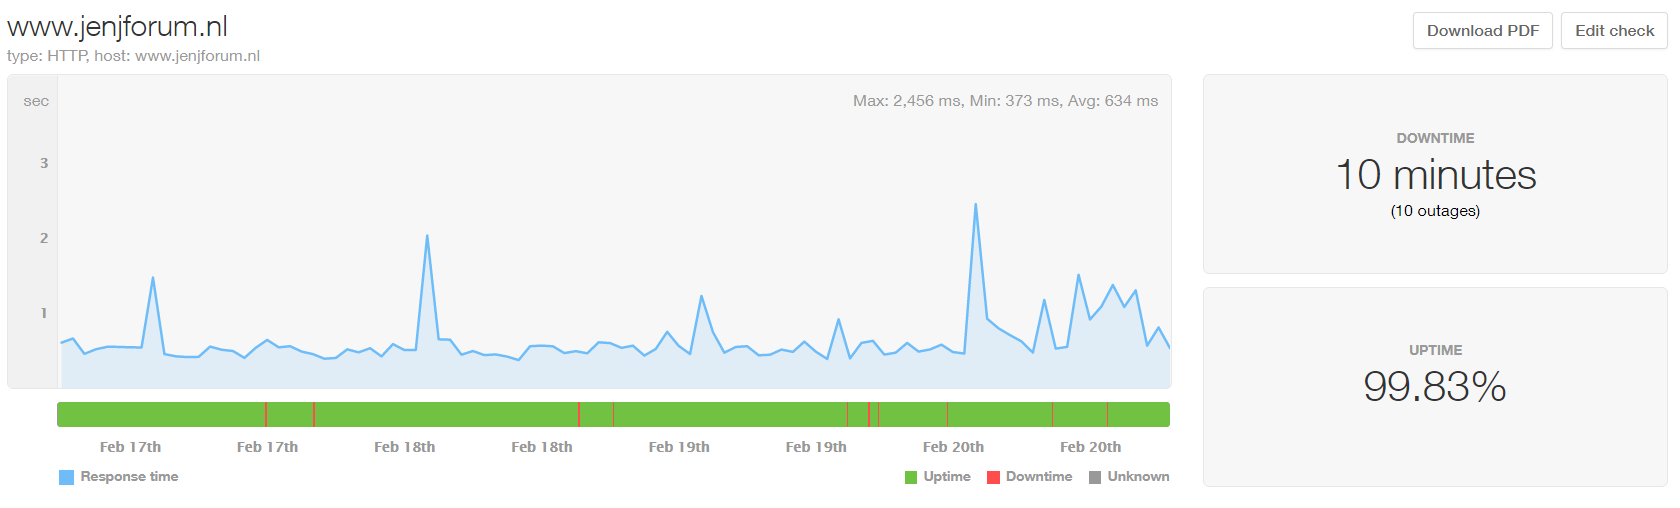 2021-02-20 20_34_39-Uptime Reports.png